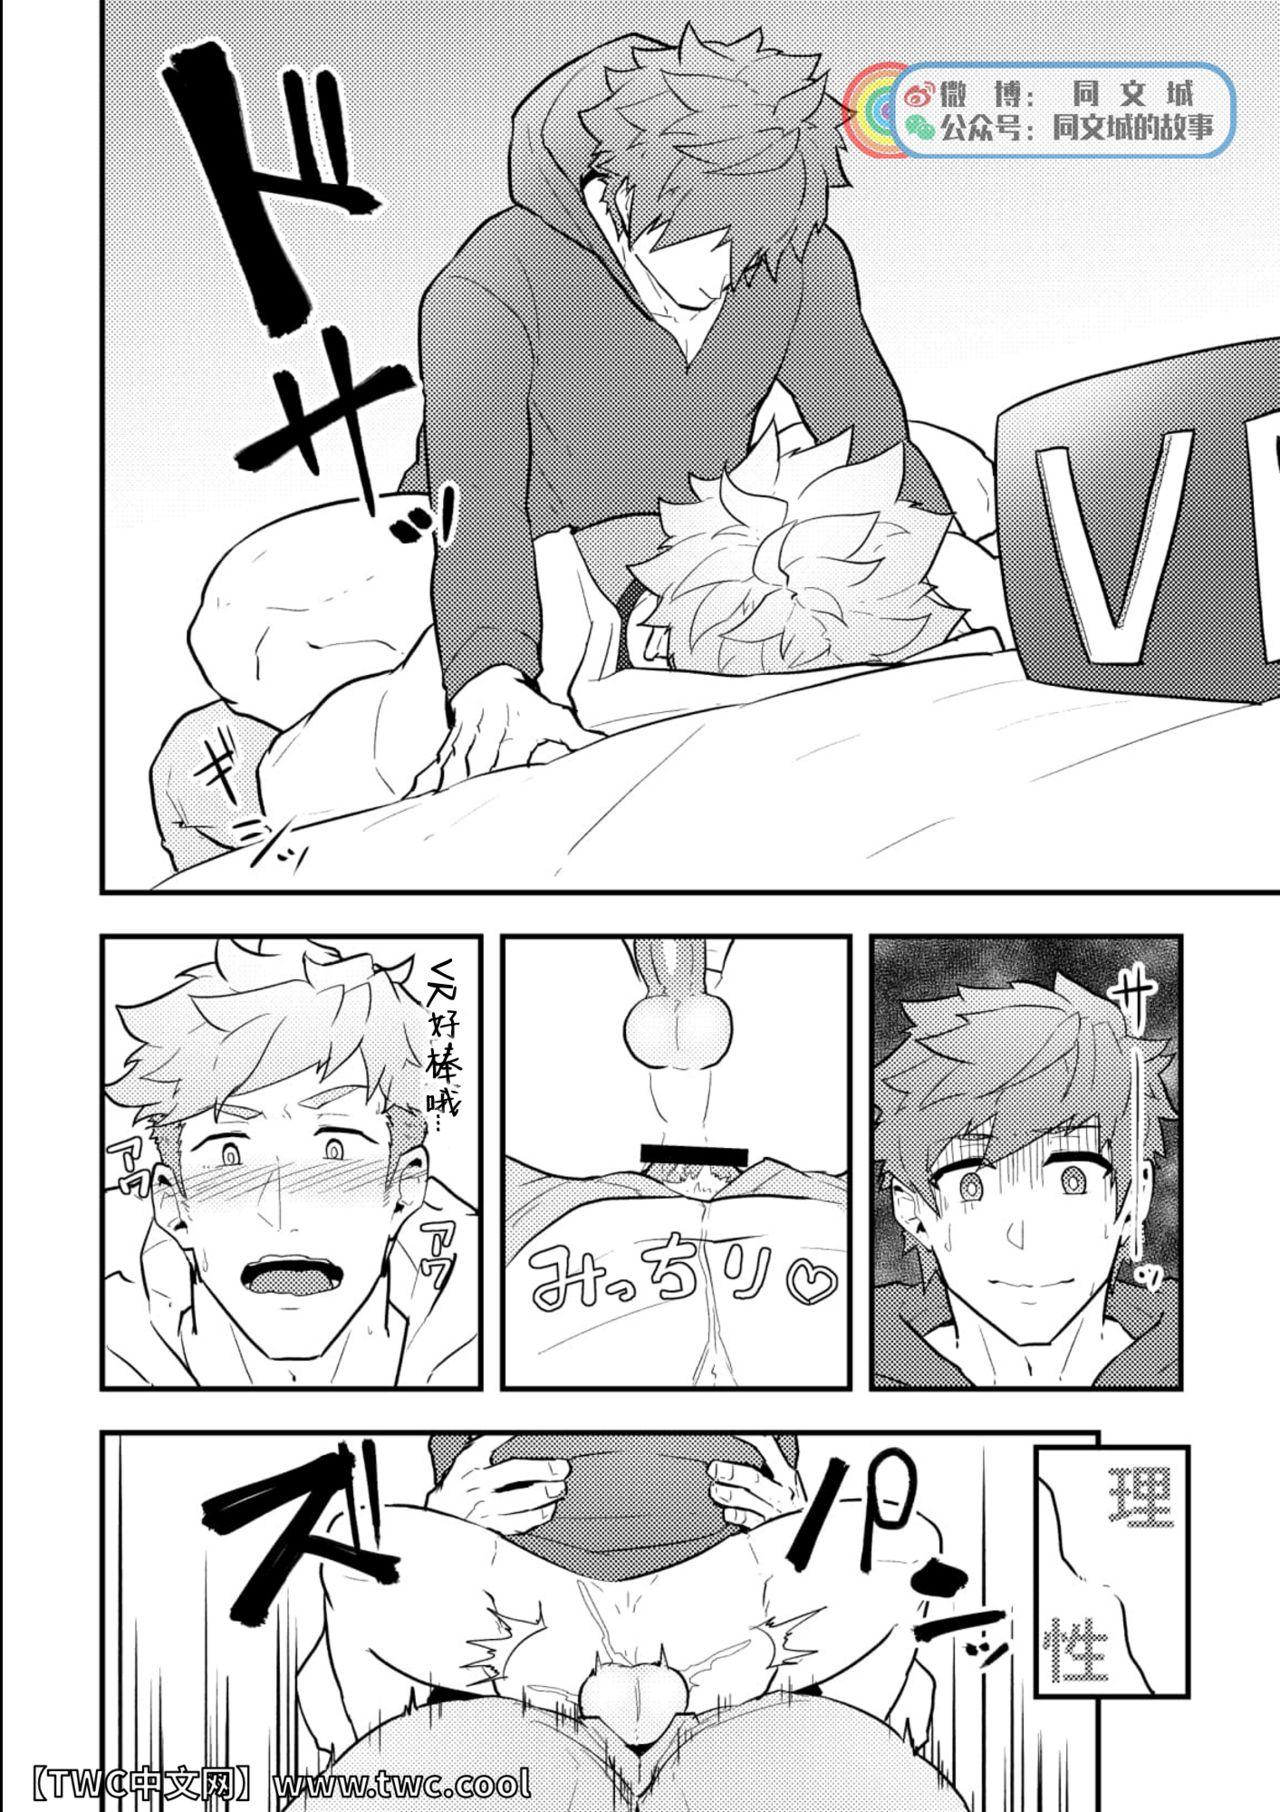 Mask Onabe Hon C95 - Granblue fantasy Punch out Pokemon | pocket monsters China - Page 4